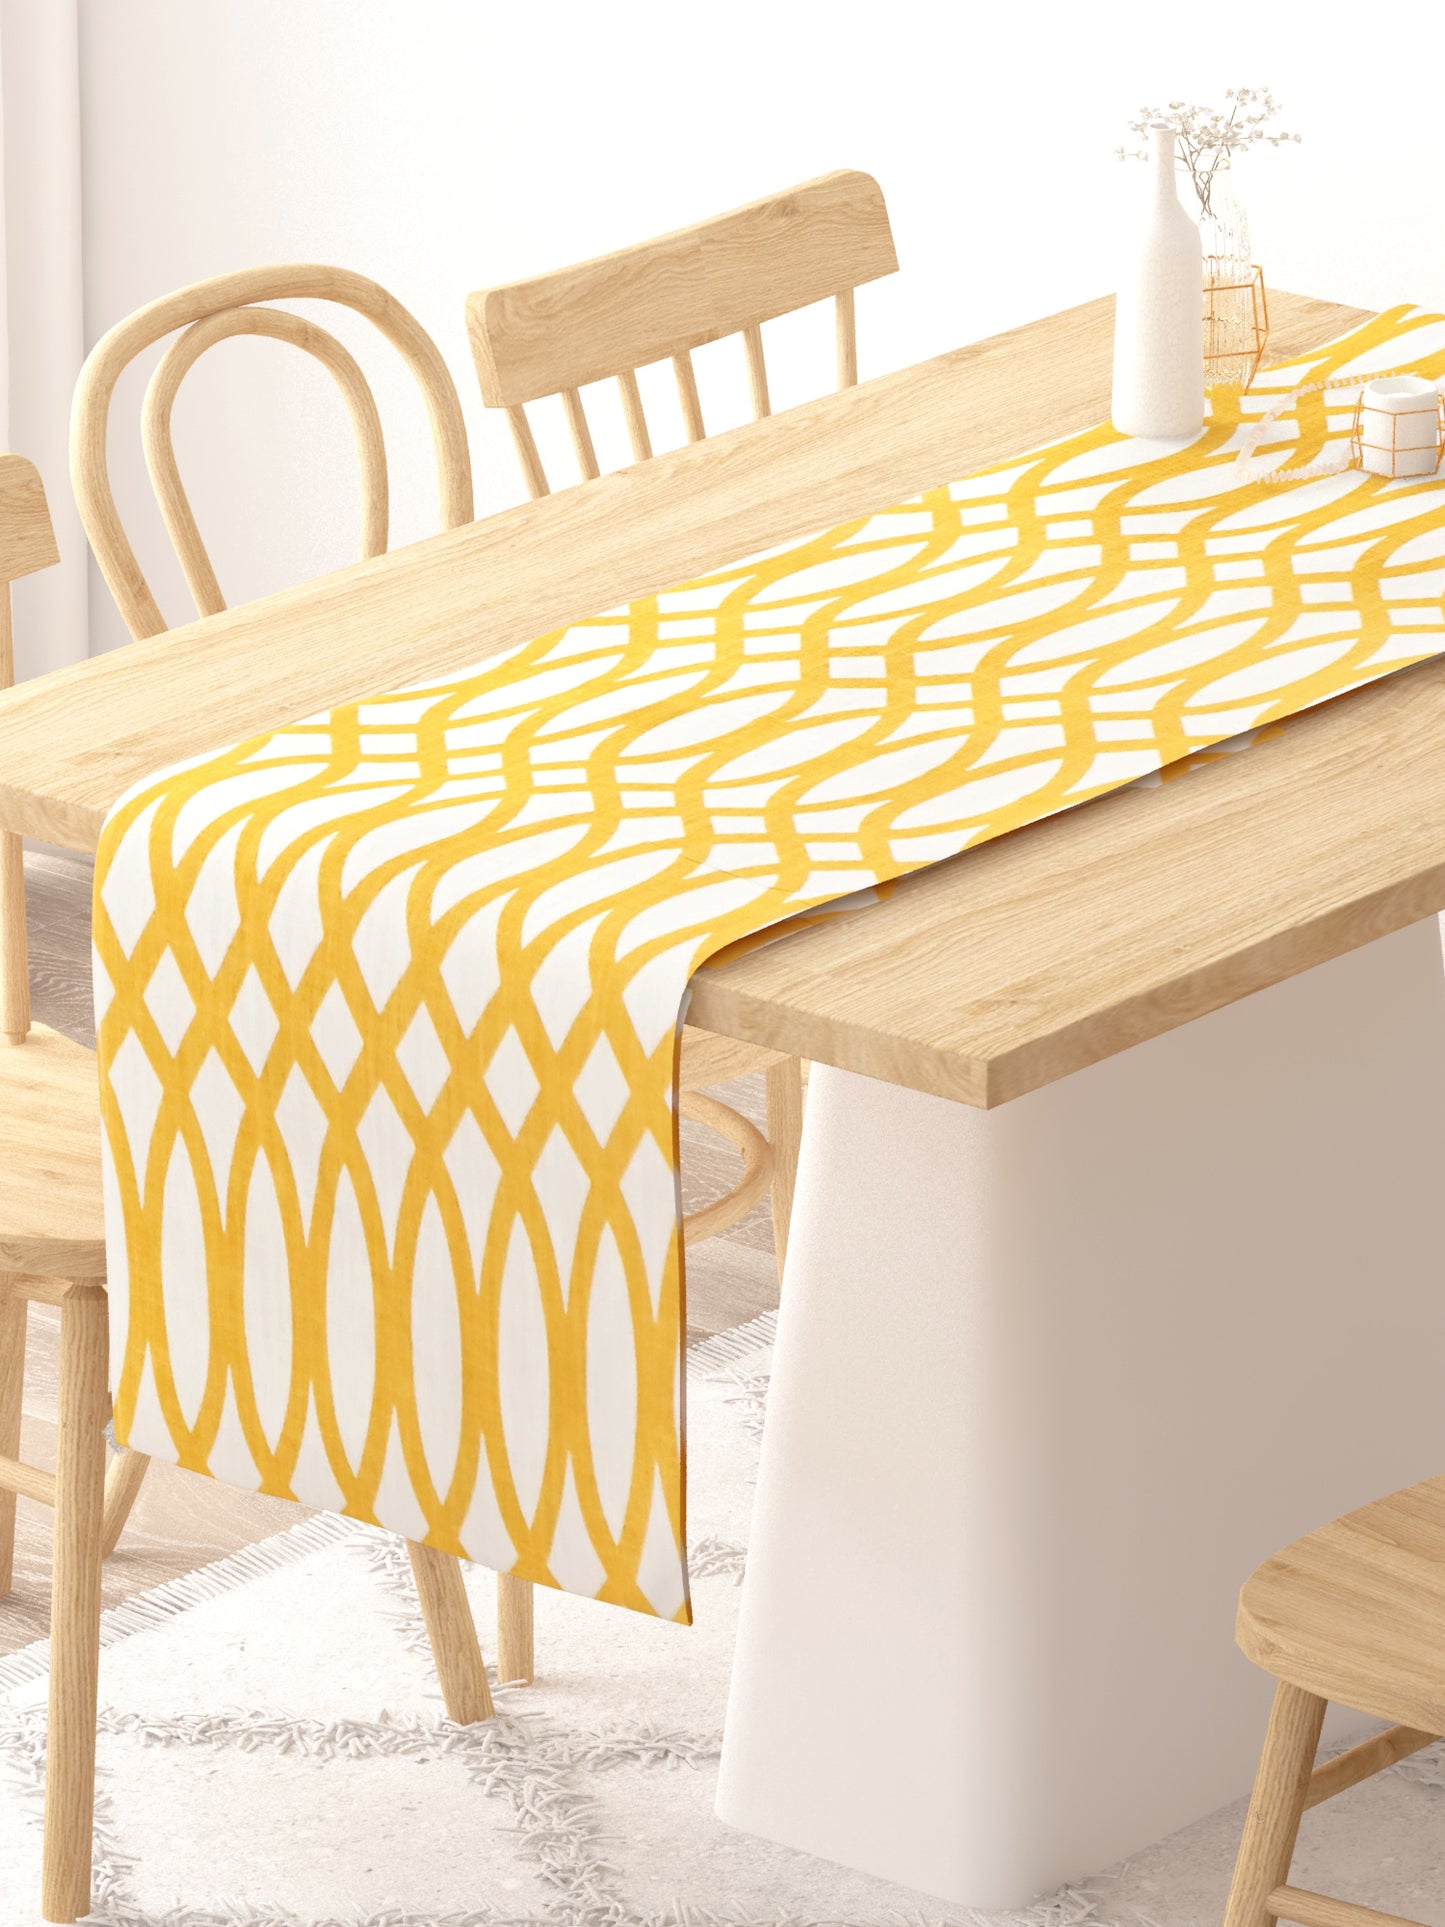 Cotton Table runner - 12X95 inches